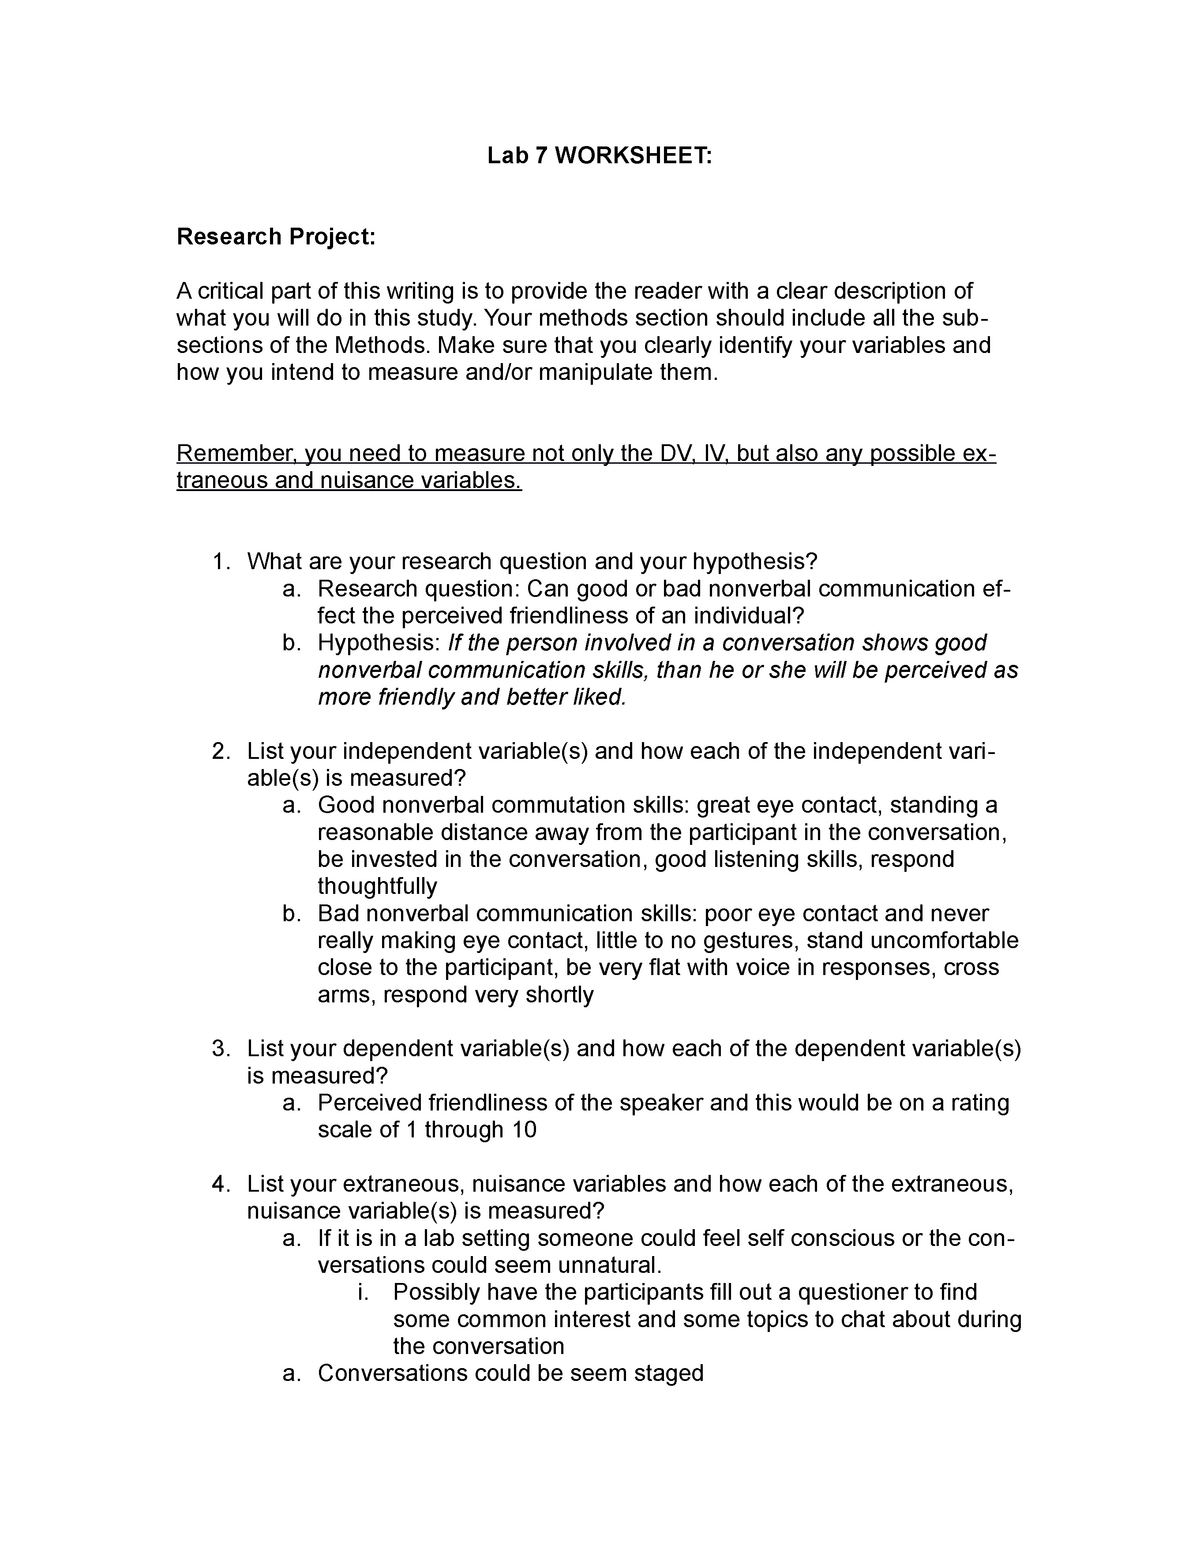 Lab22 Worksheet: Completed step by step - Lab 22 WORKSHEET: Research Inside Writing A Hypothesis Worksheet